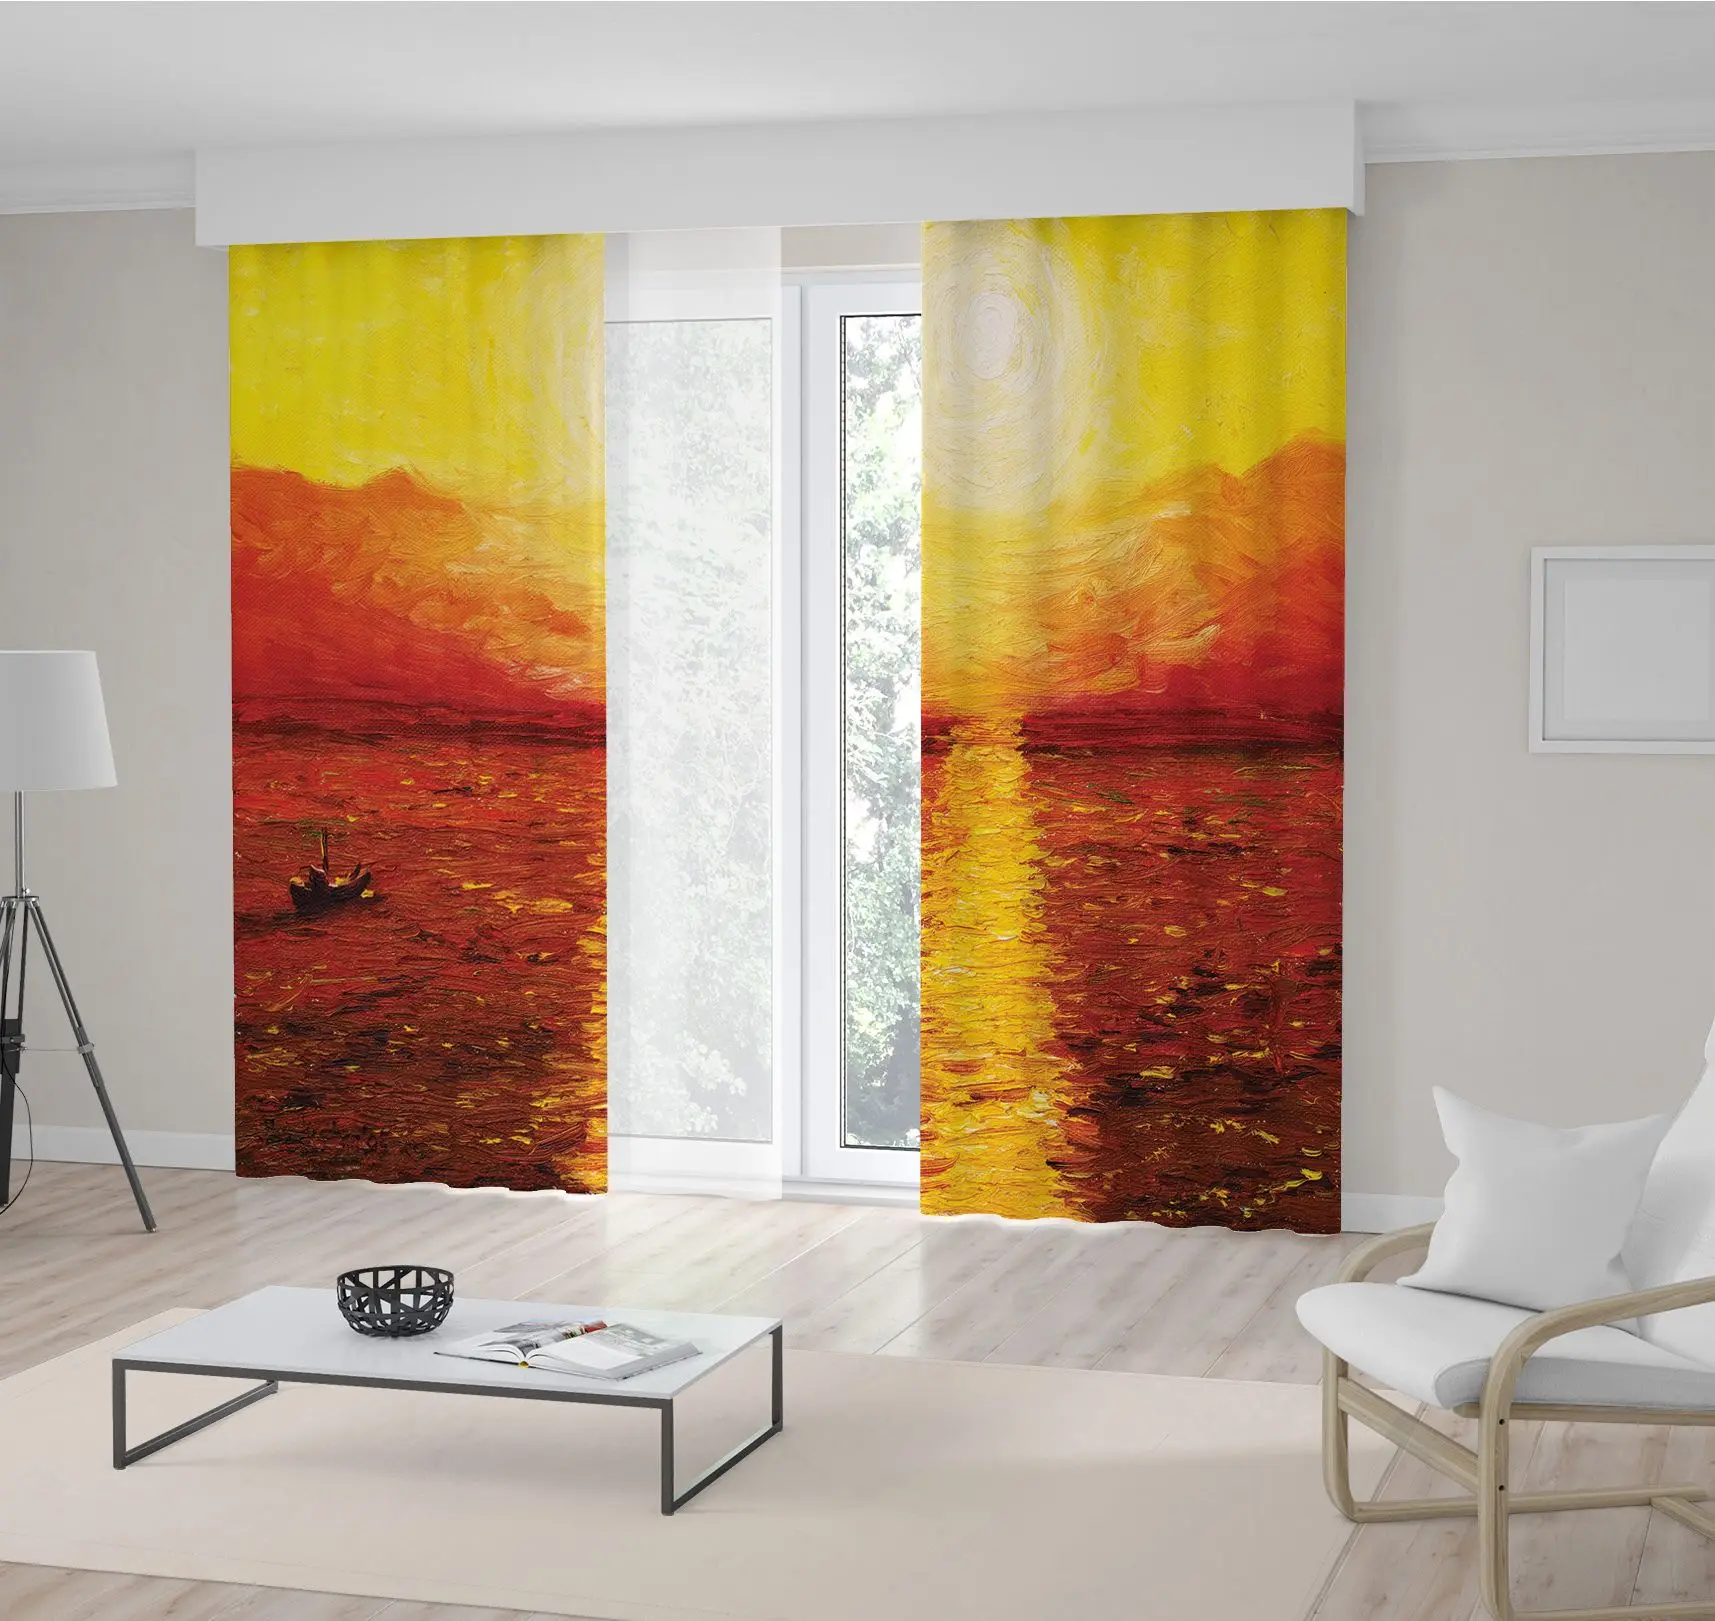 

Curtain Sunset over the Sea Sailing Boat Peaceful Scene in Orange and Yellow Nature Waterscape Oil Painting Printed